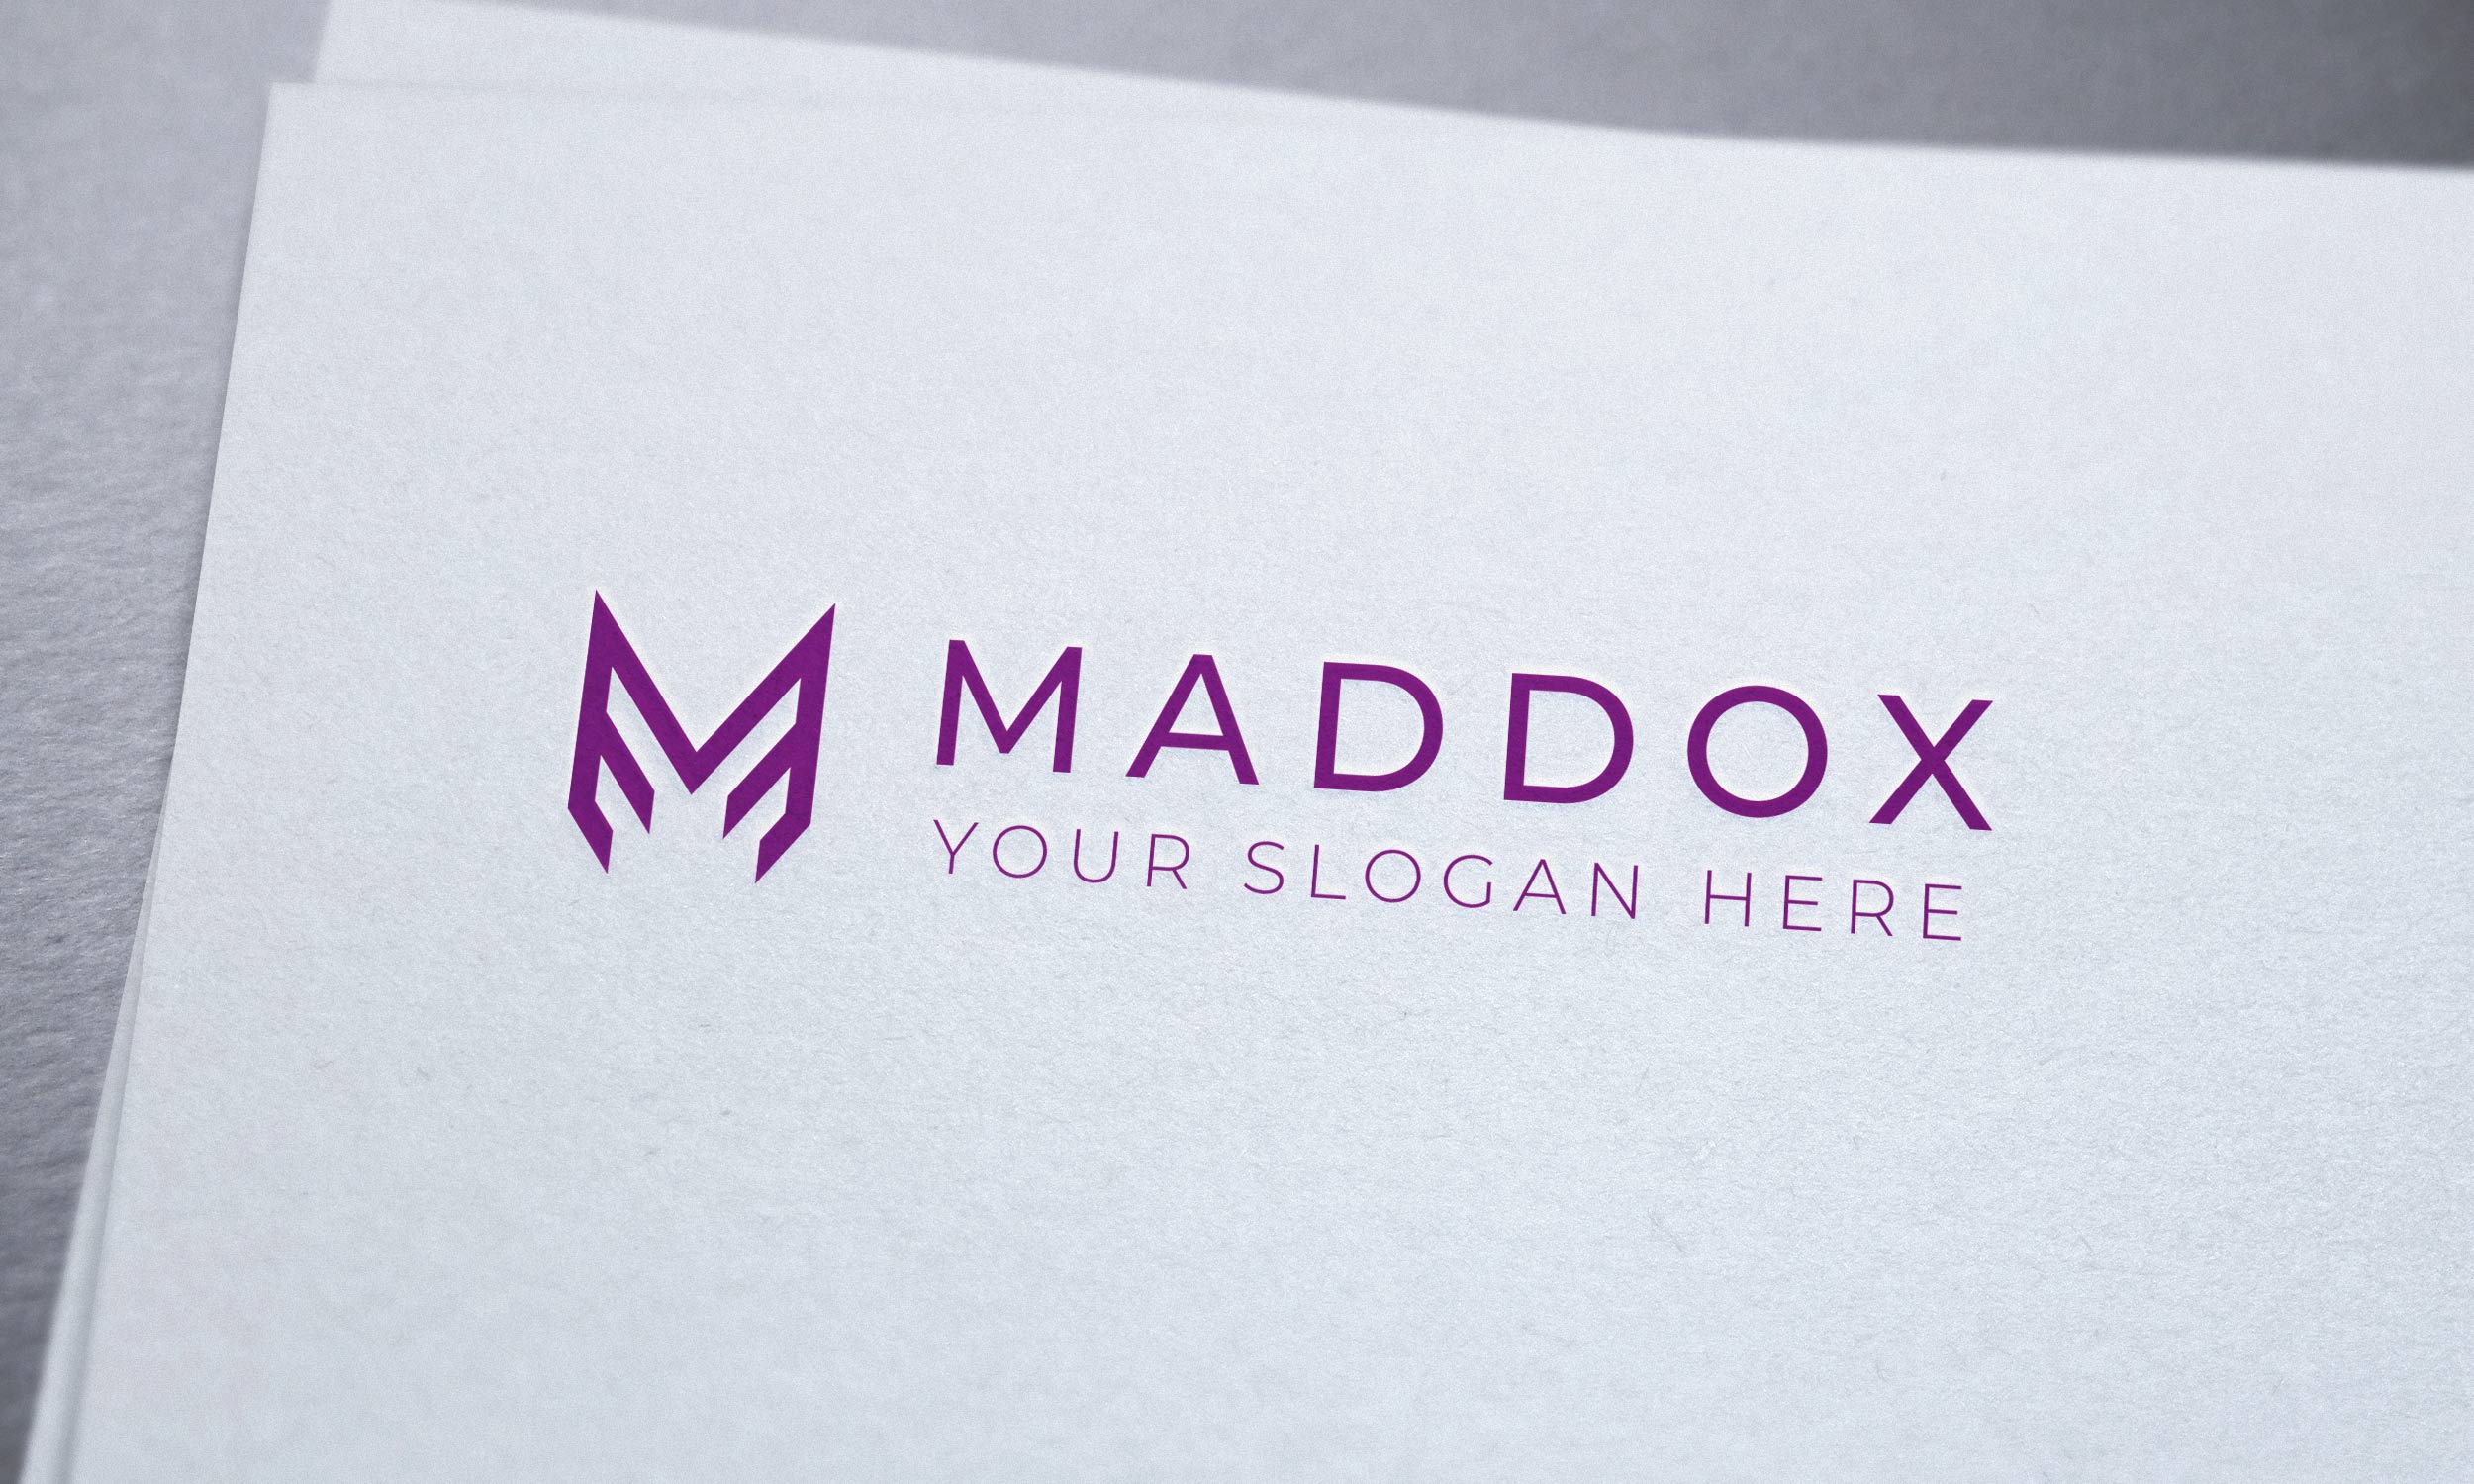 Purple letter logo on a white paper.